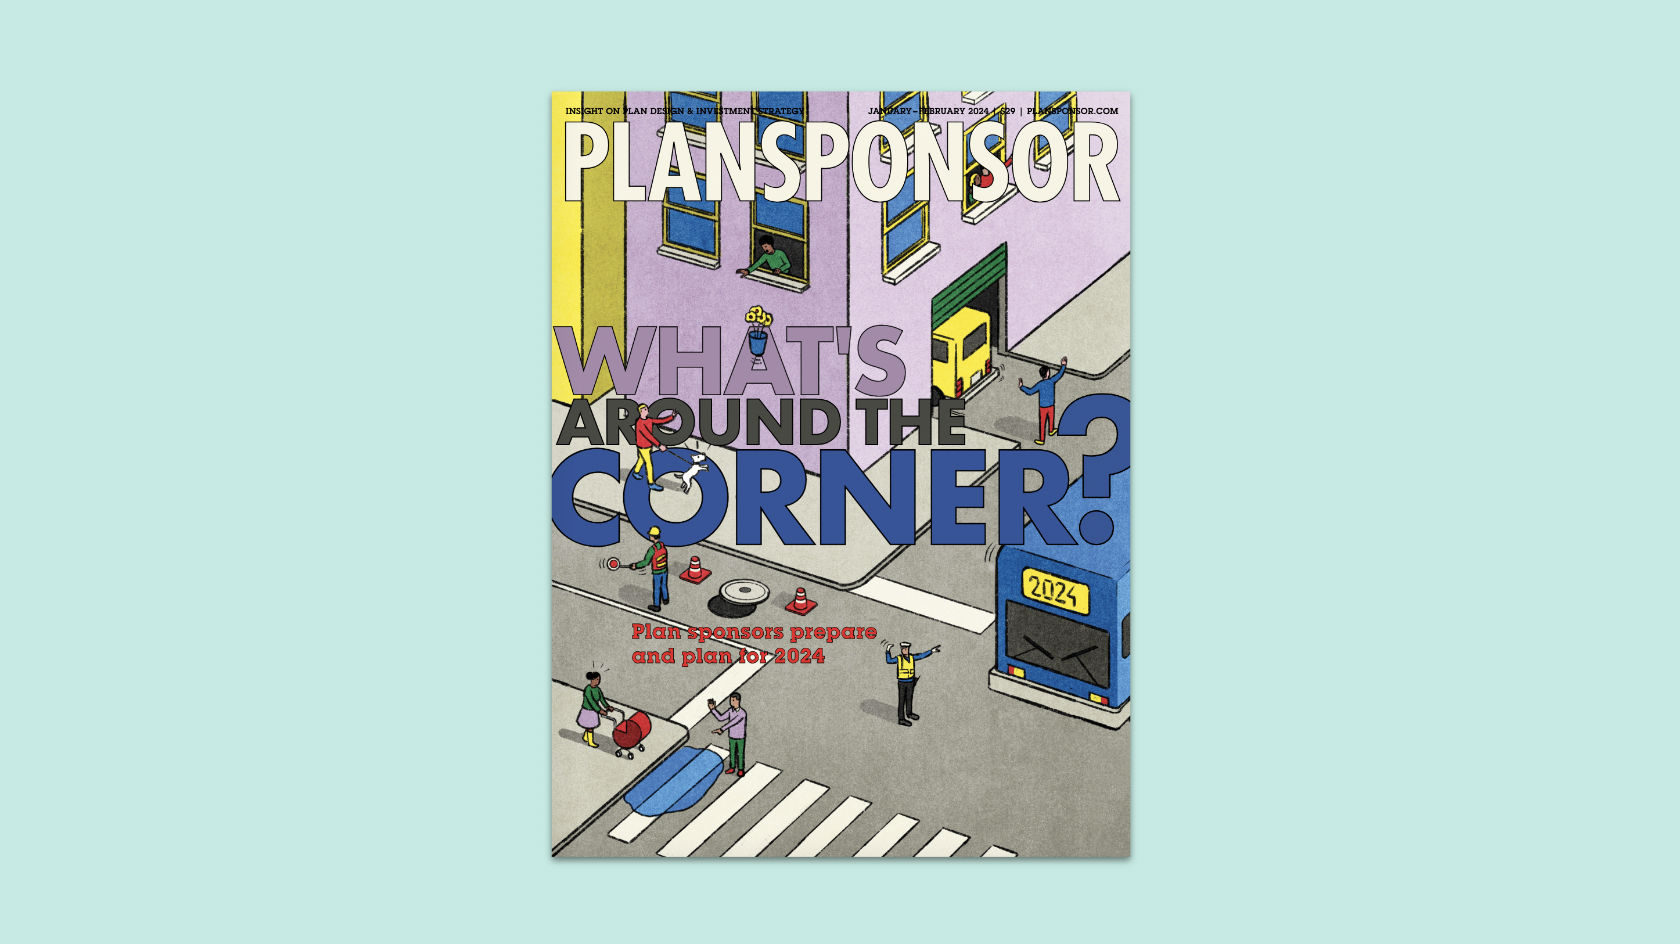 PLANSPONSOR What's Around the Corner Financial Wellbeing